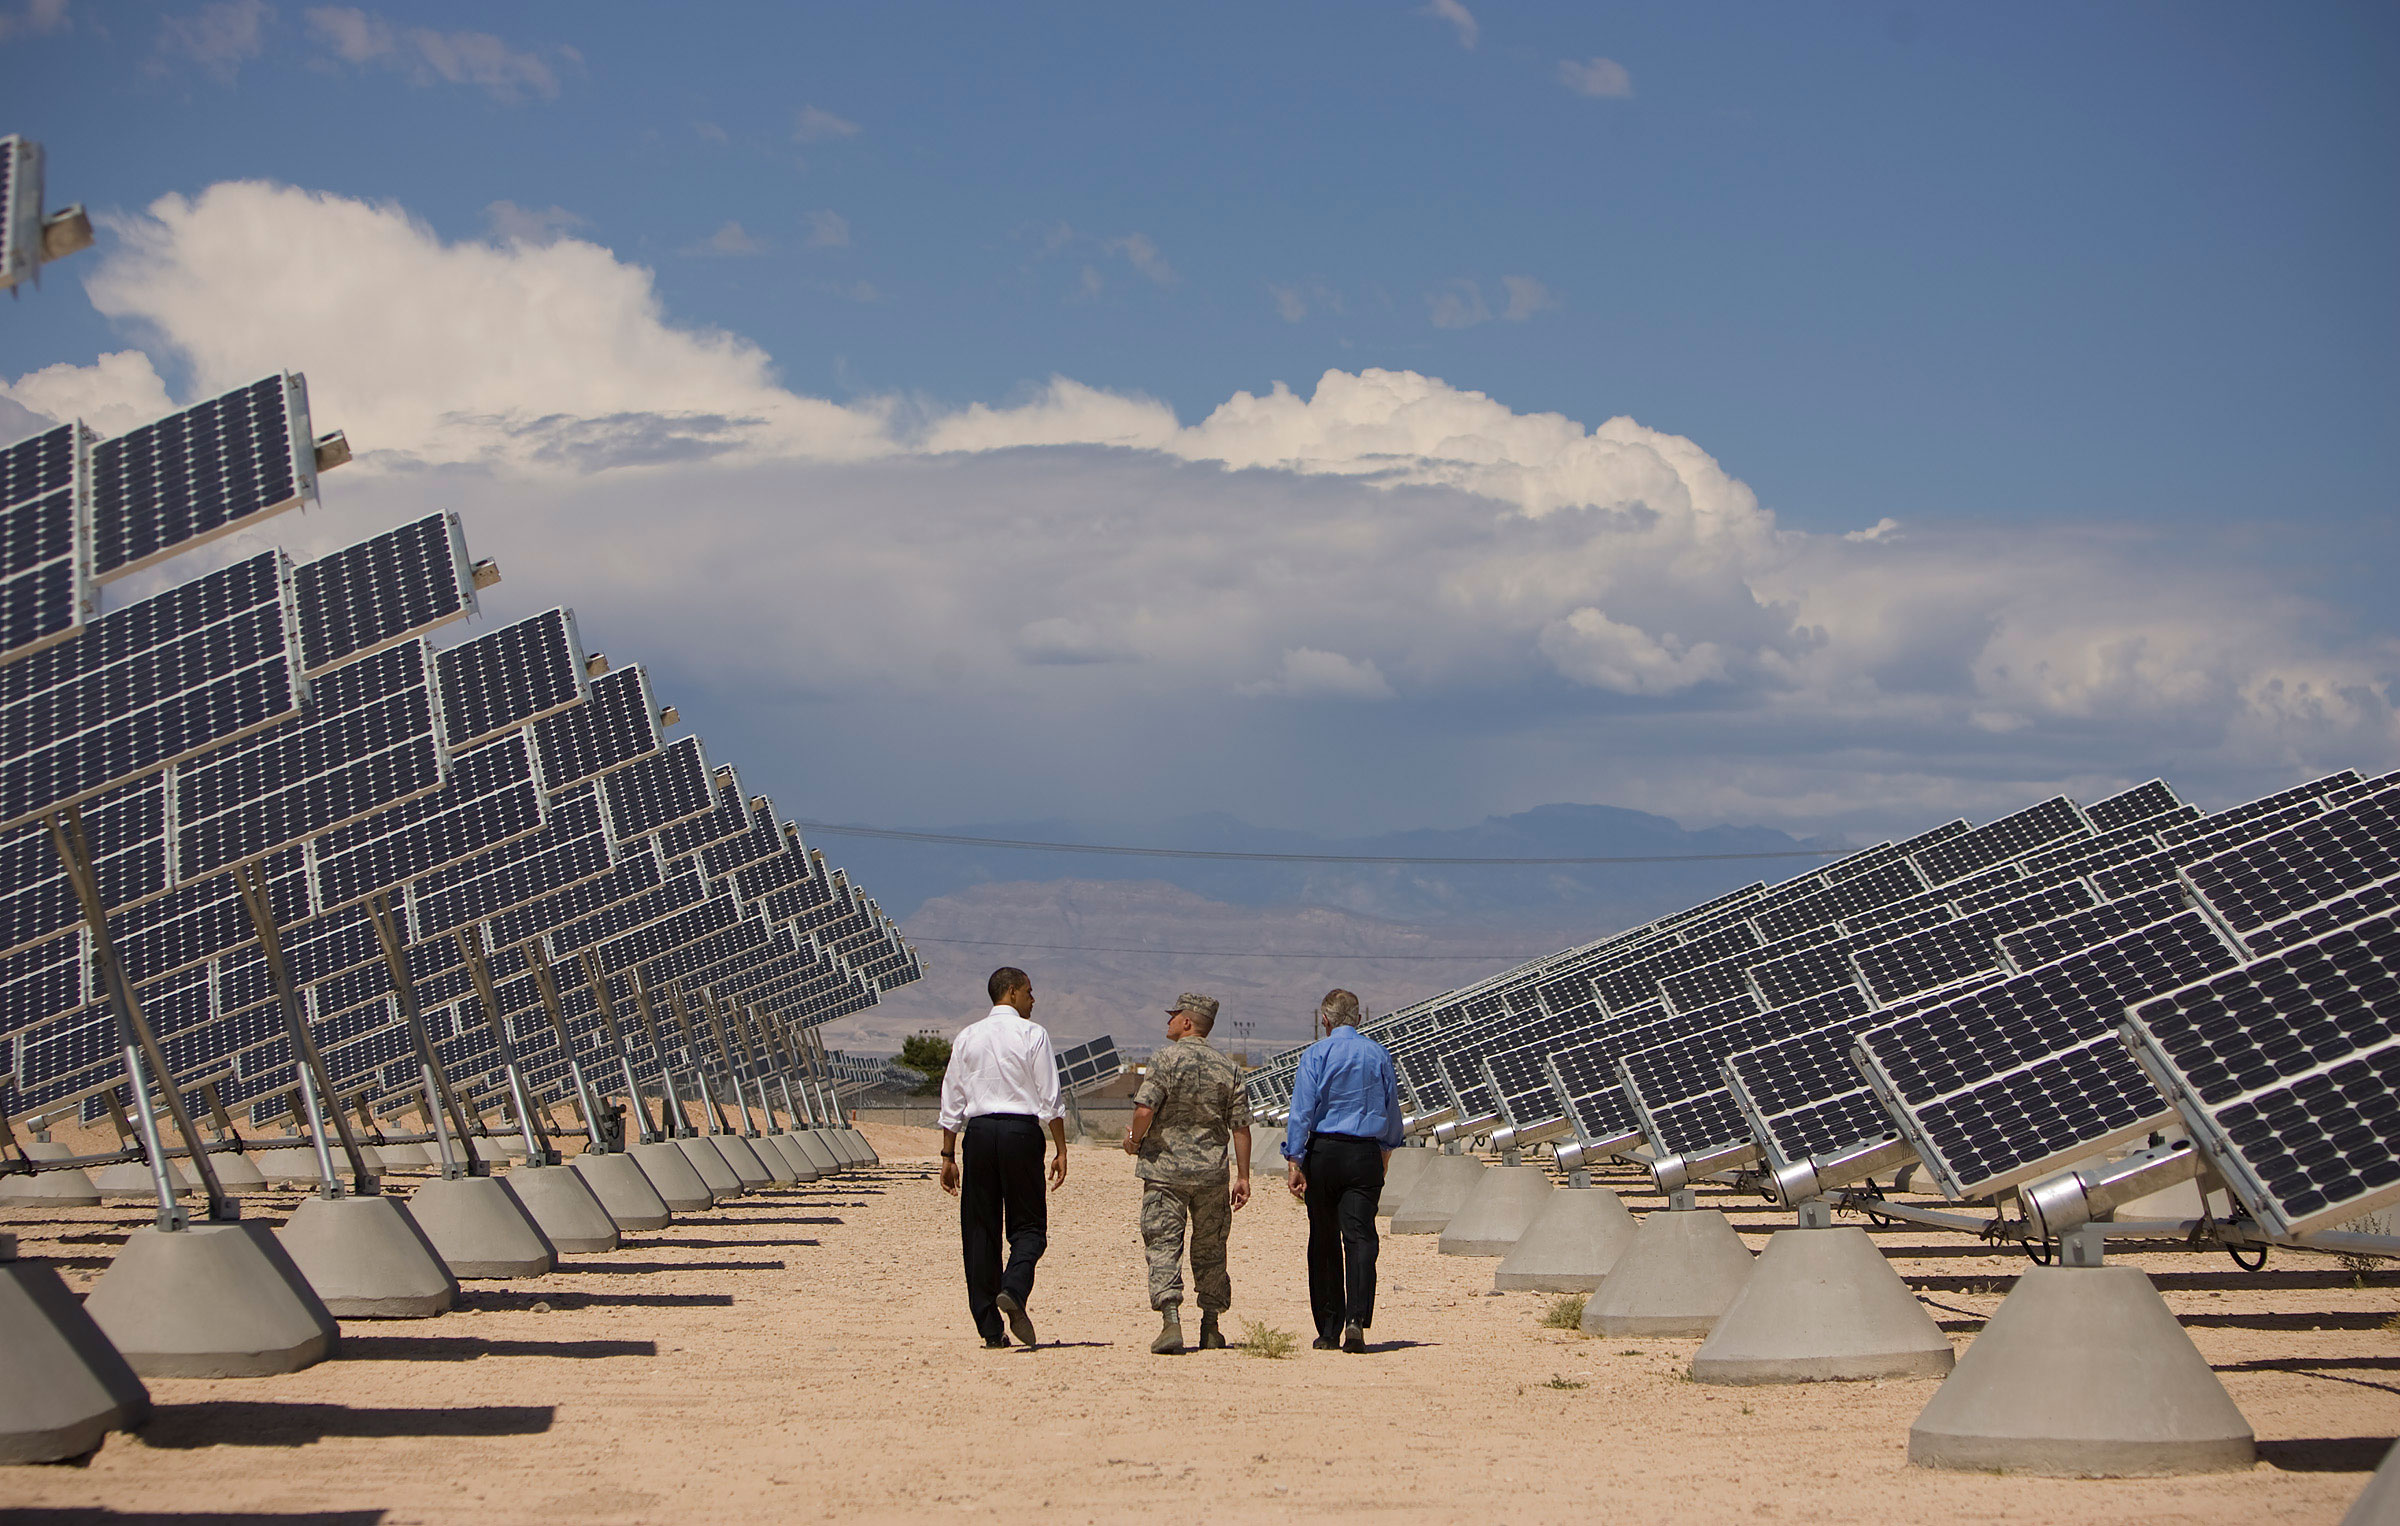 Barack Obama takes a tour of solar power facilities at Nellis Air Force Base in Las Vegas.